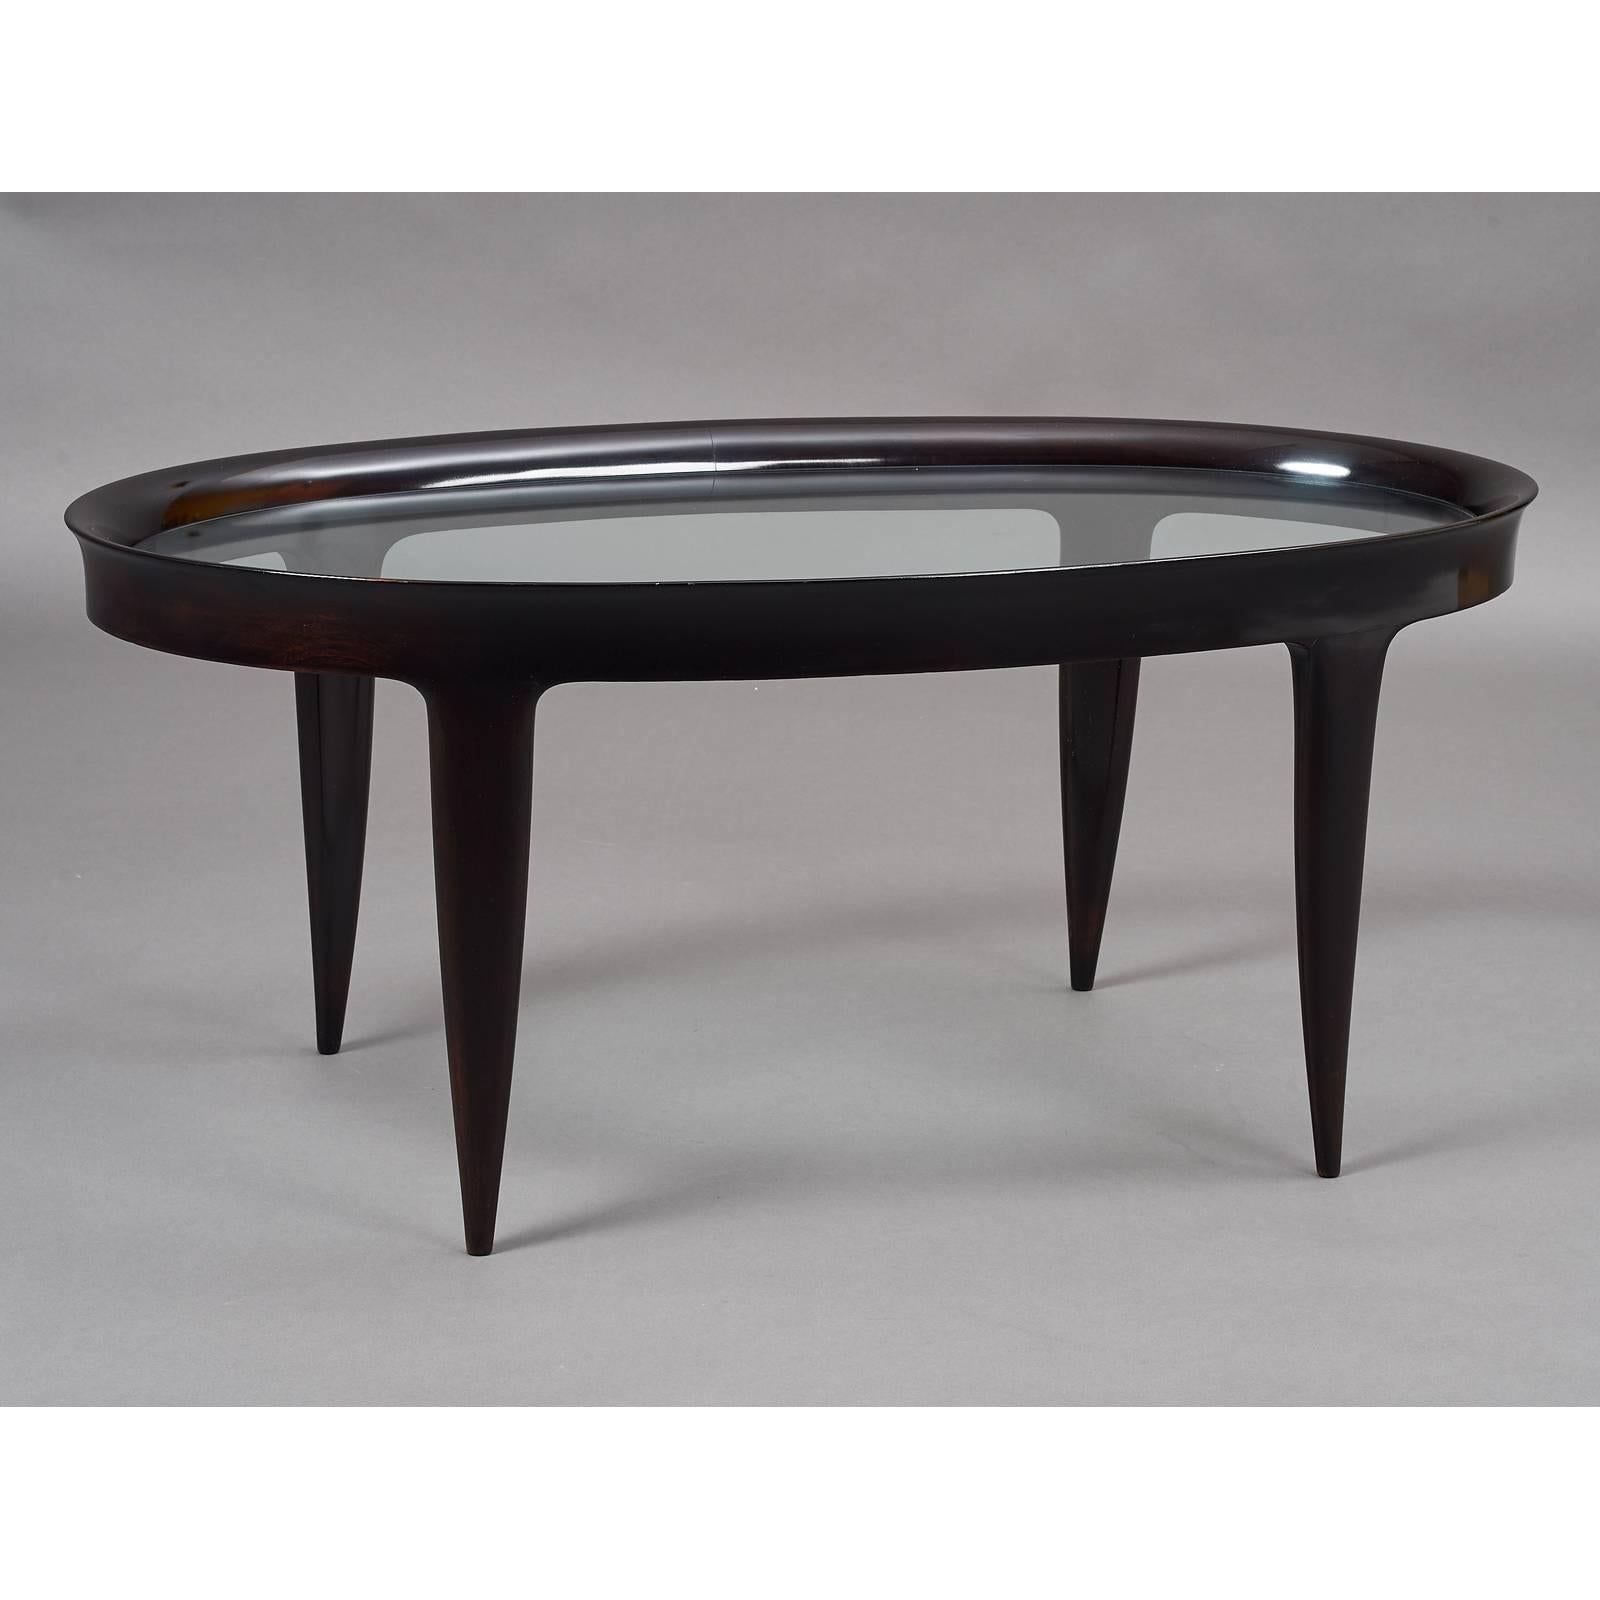 Elegant oval coffee or side table in the style of Gio Ponti,
stained wood with glass top inset in a beautifully carved frame
and tapered legs, Italy, 1950s.
Dimensions: 44 x 23.5 x 19 H.
        